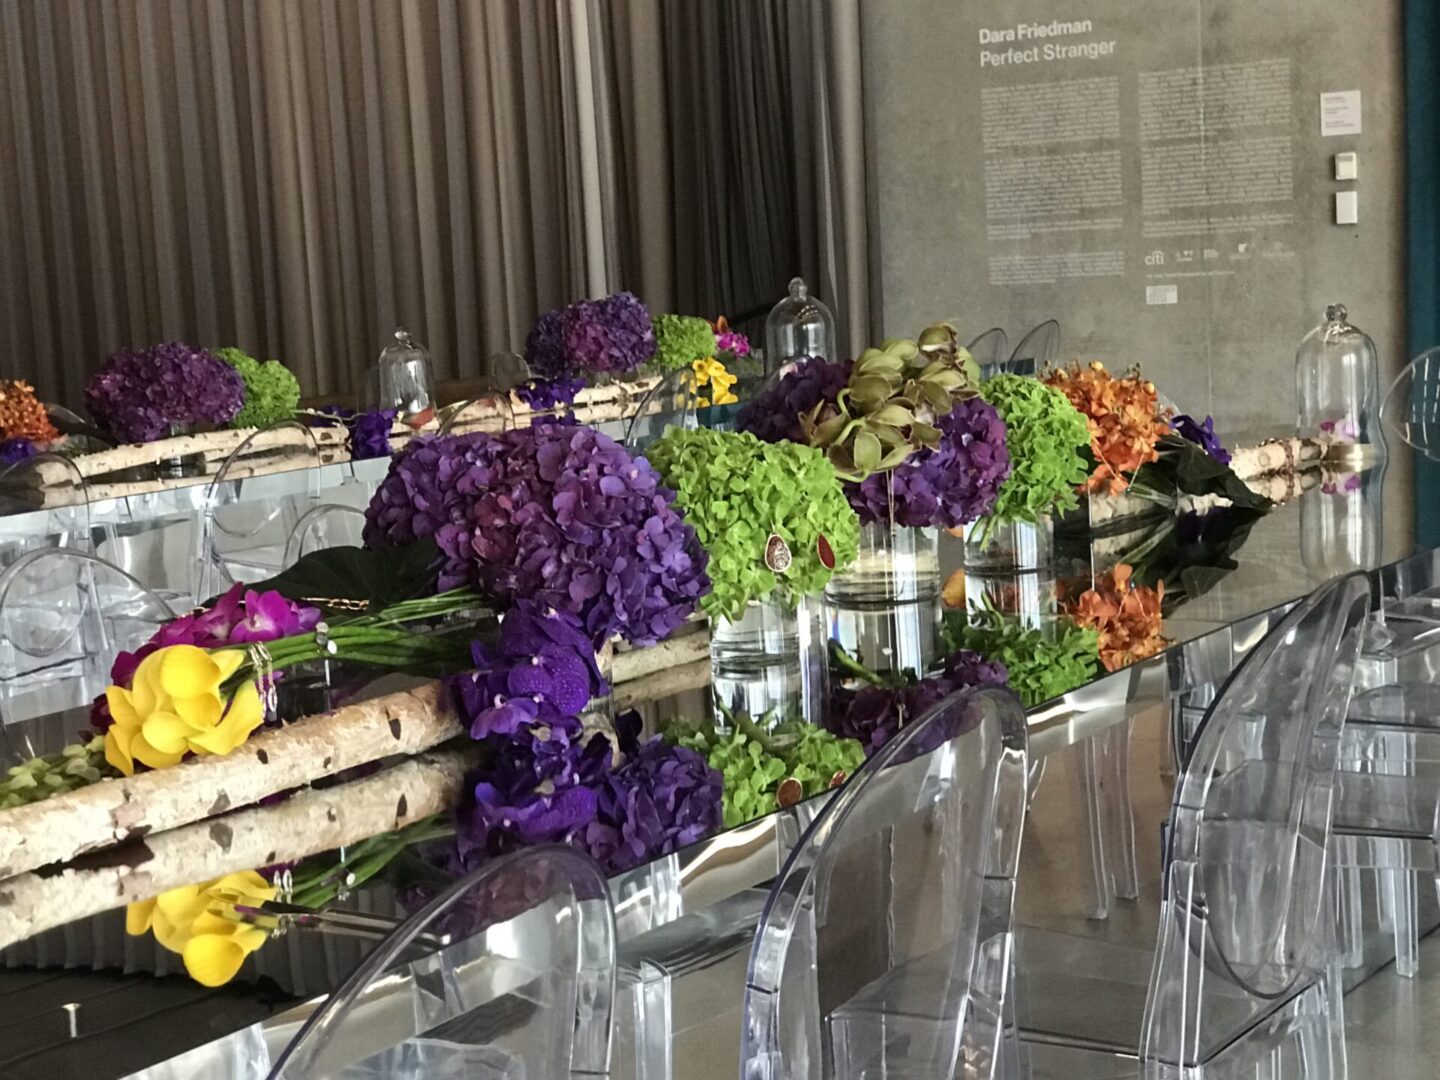 A long table with flowers and glasses on it